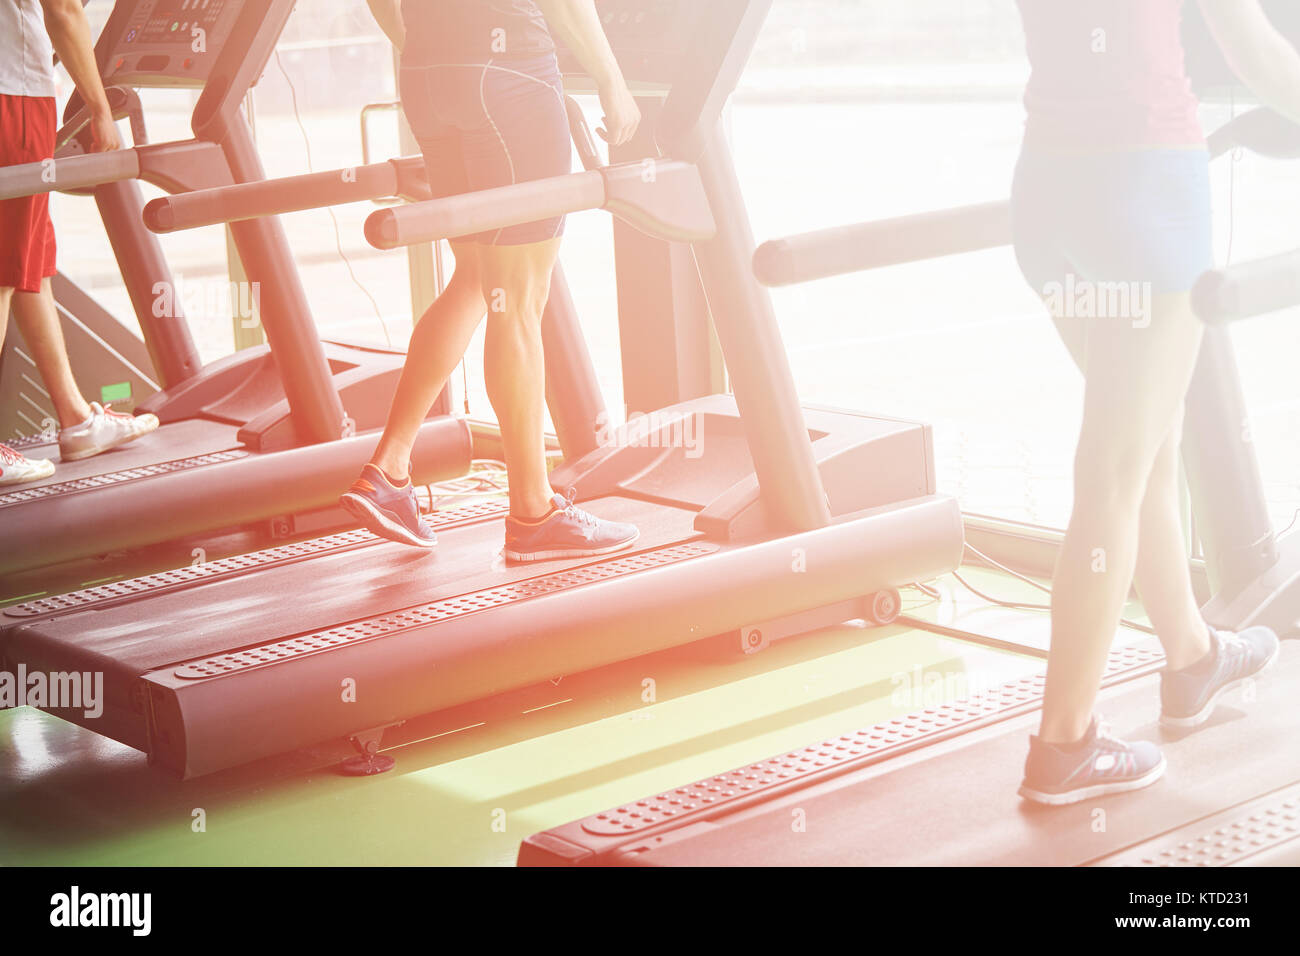 People running in machine treadmill at fitness gym club Stock Photo